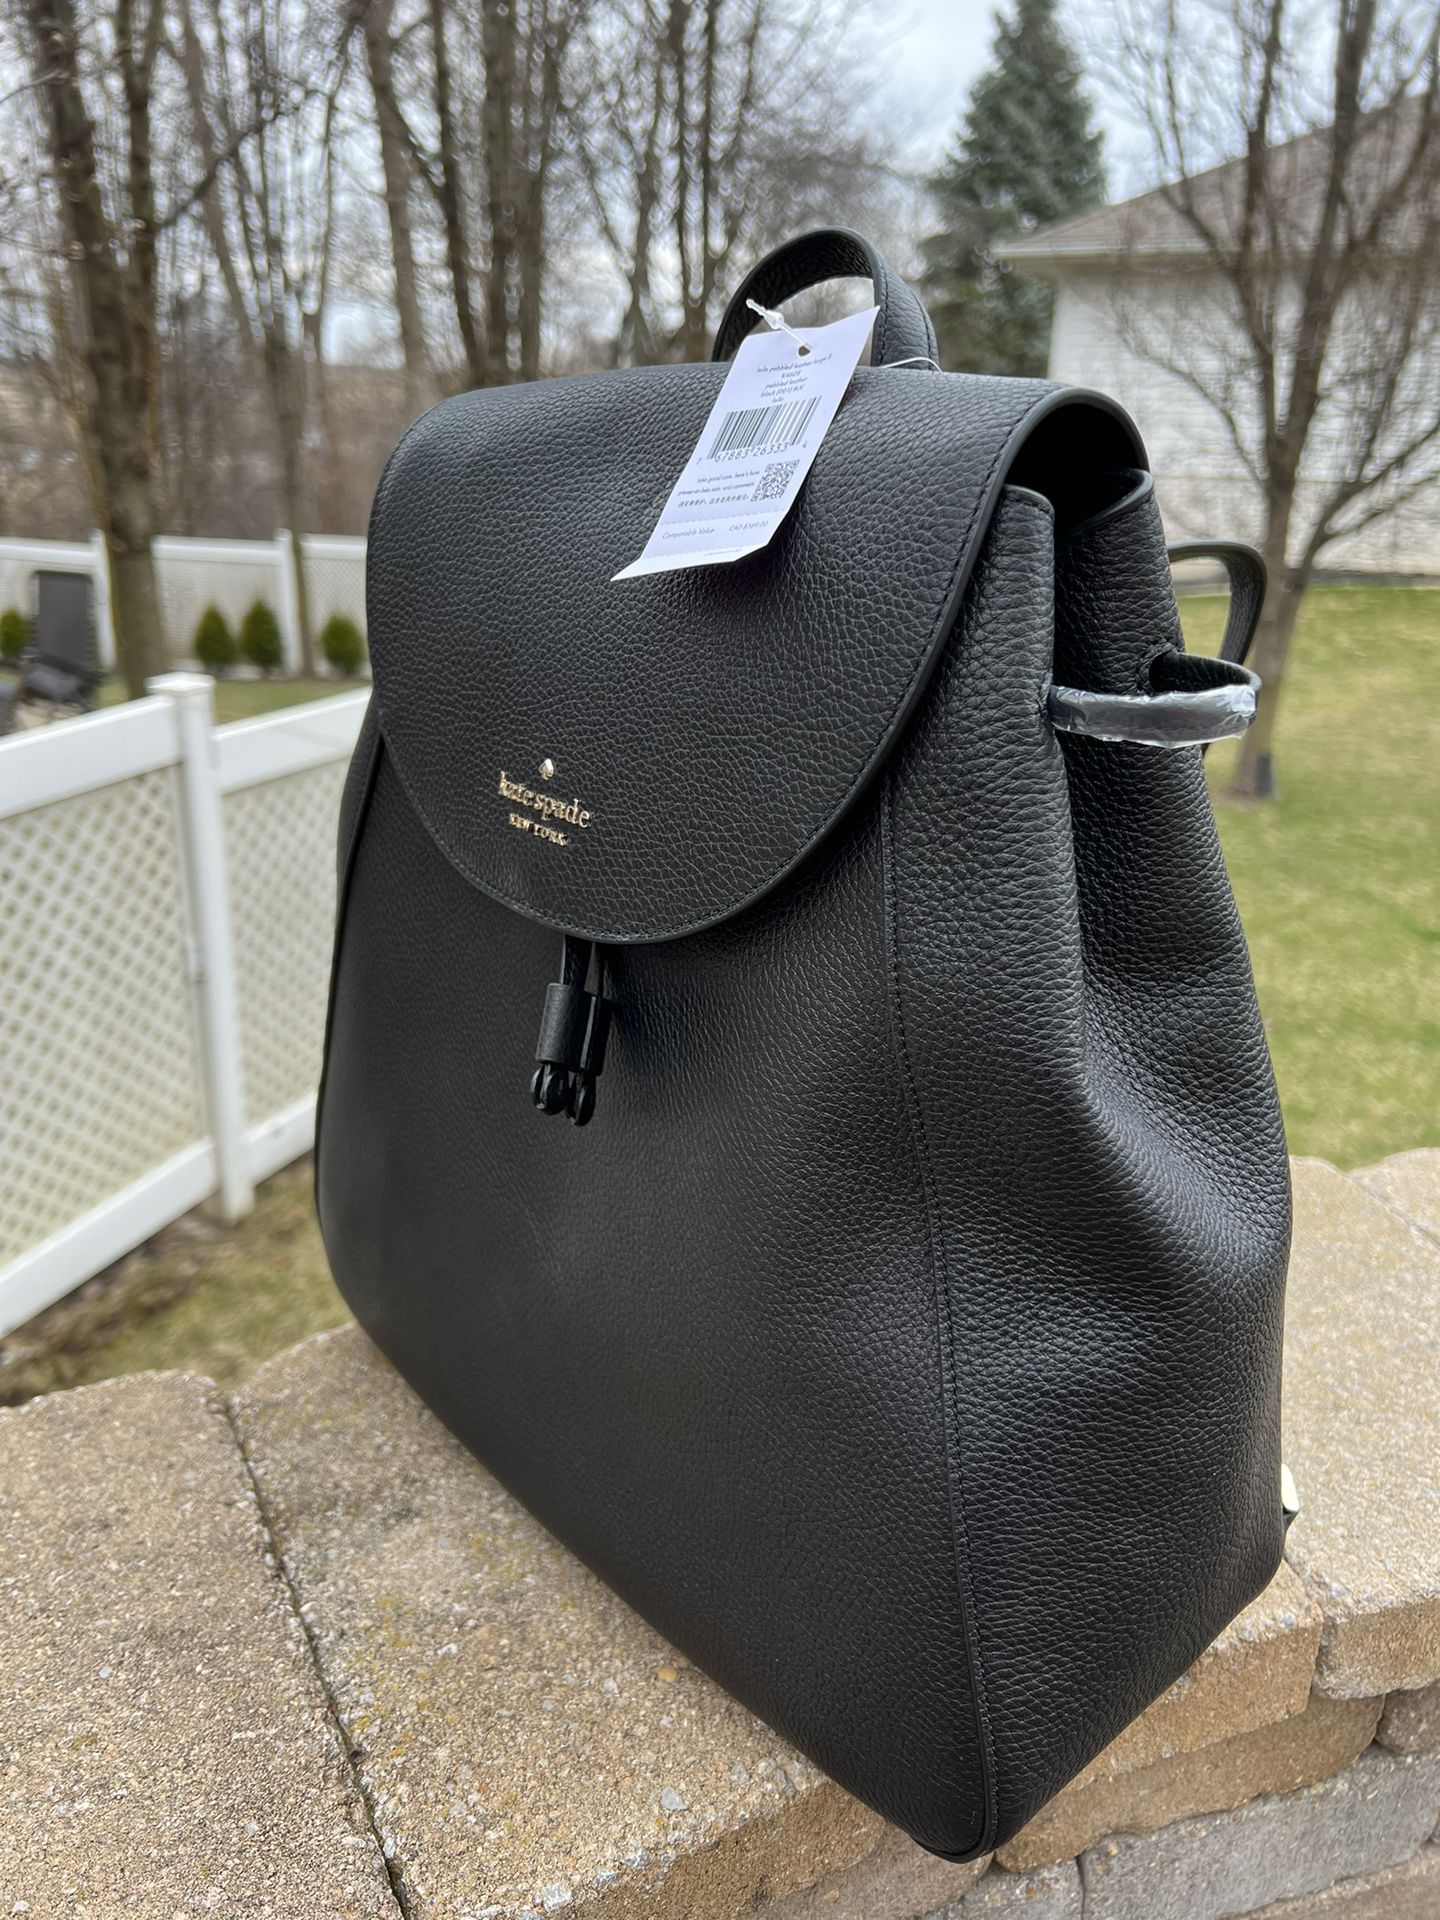 Kate Spade Leila Large Flap Backpack for Sale in Orland Park, IL